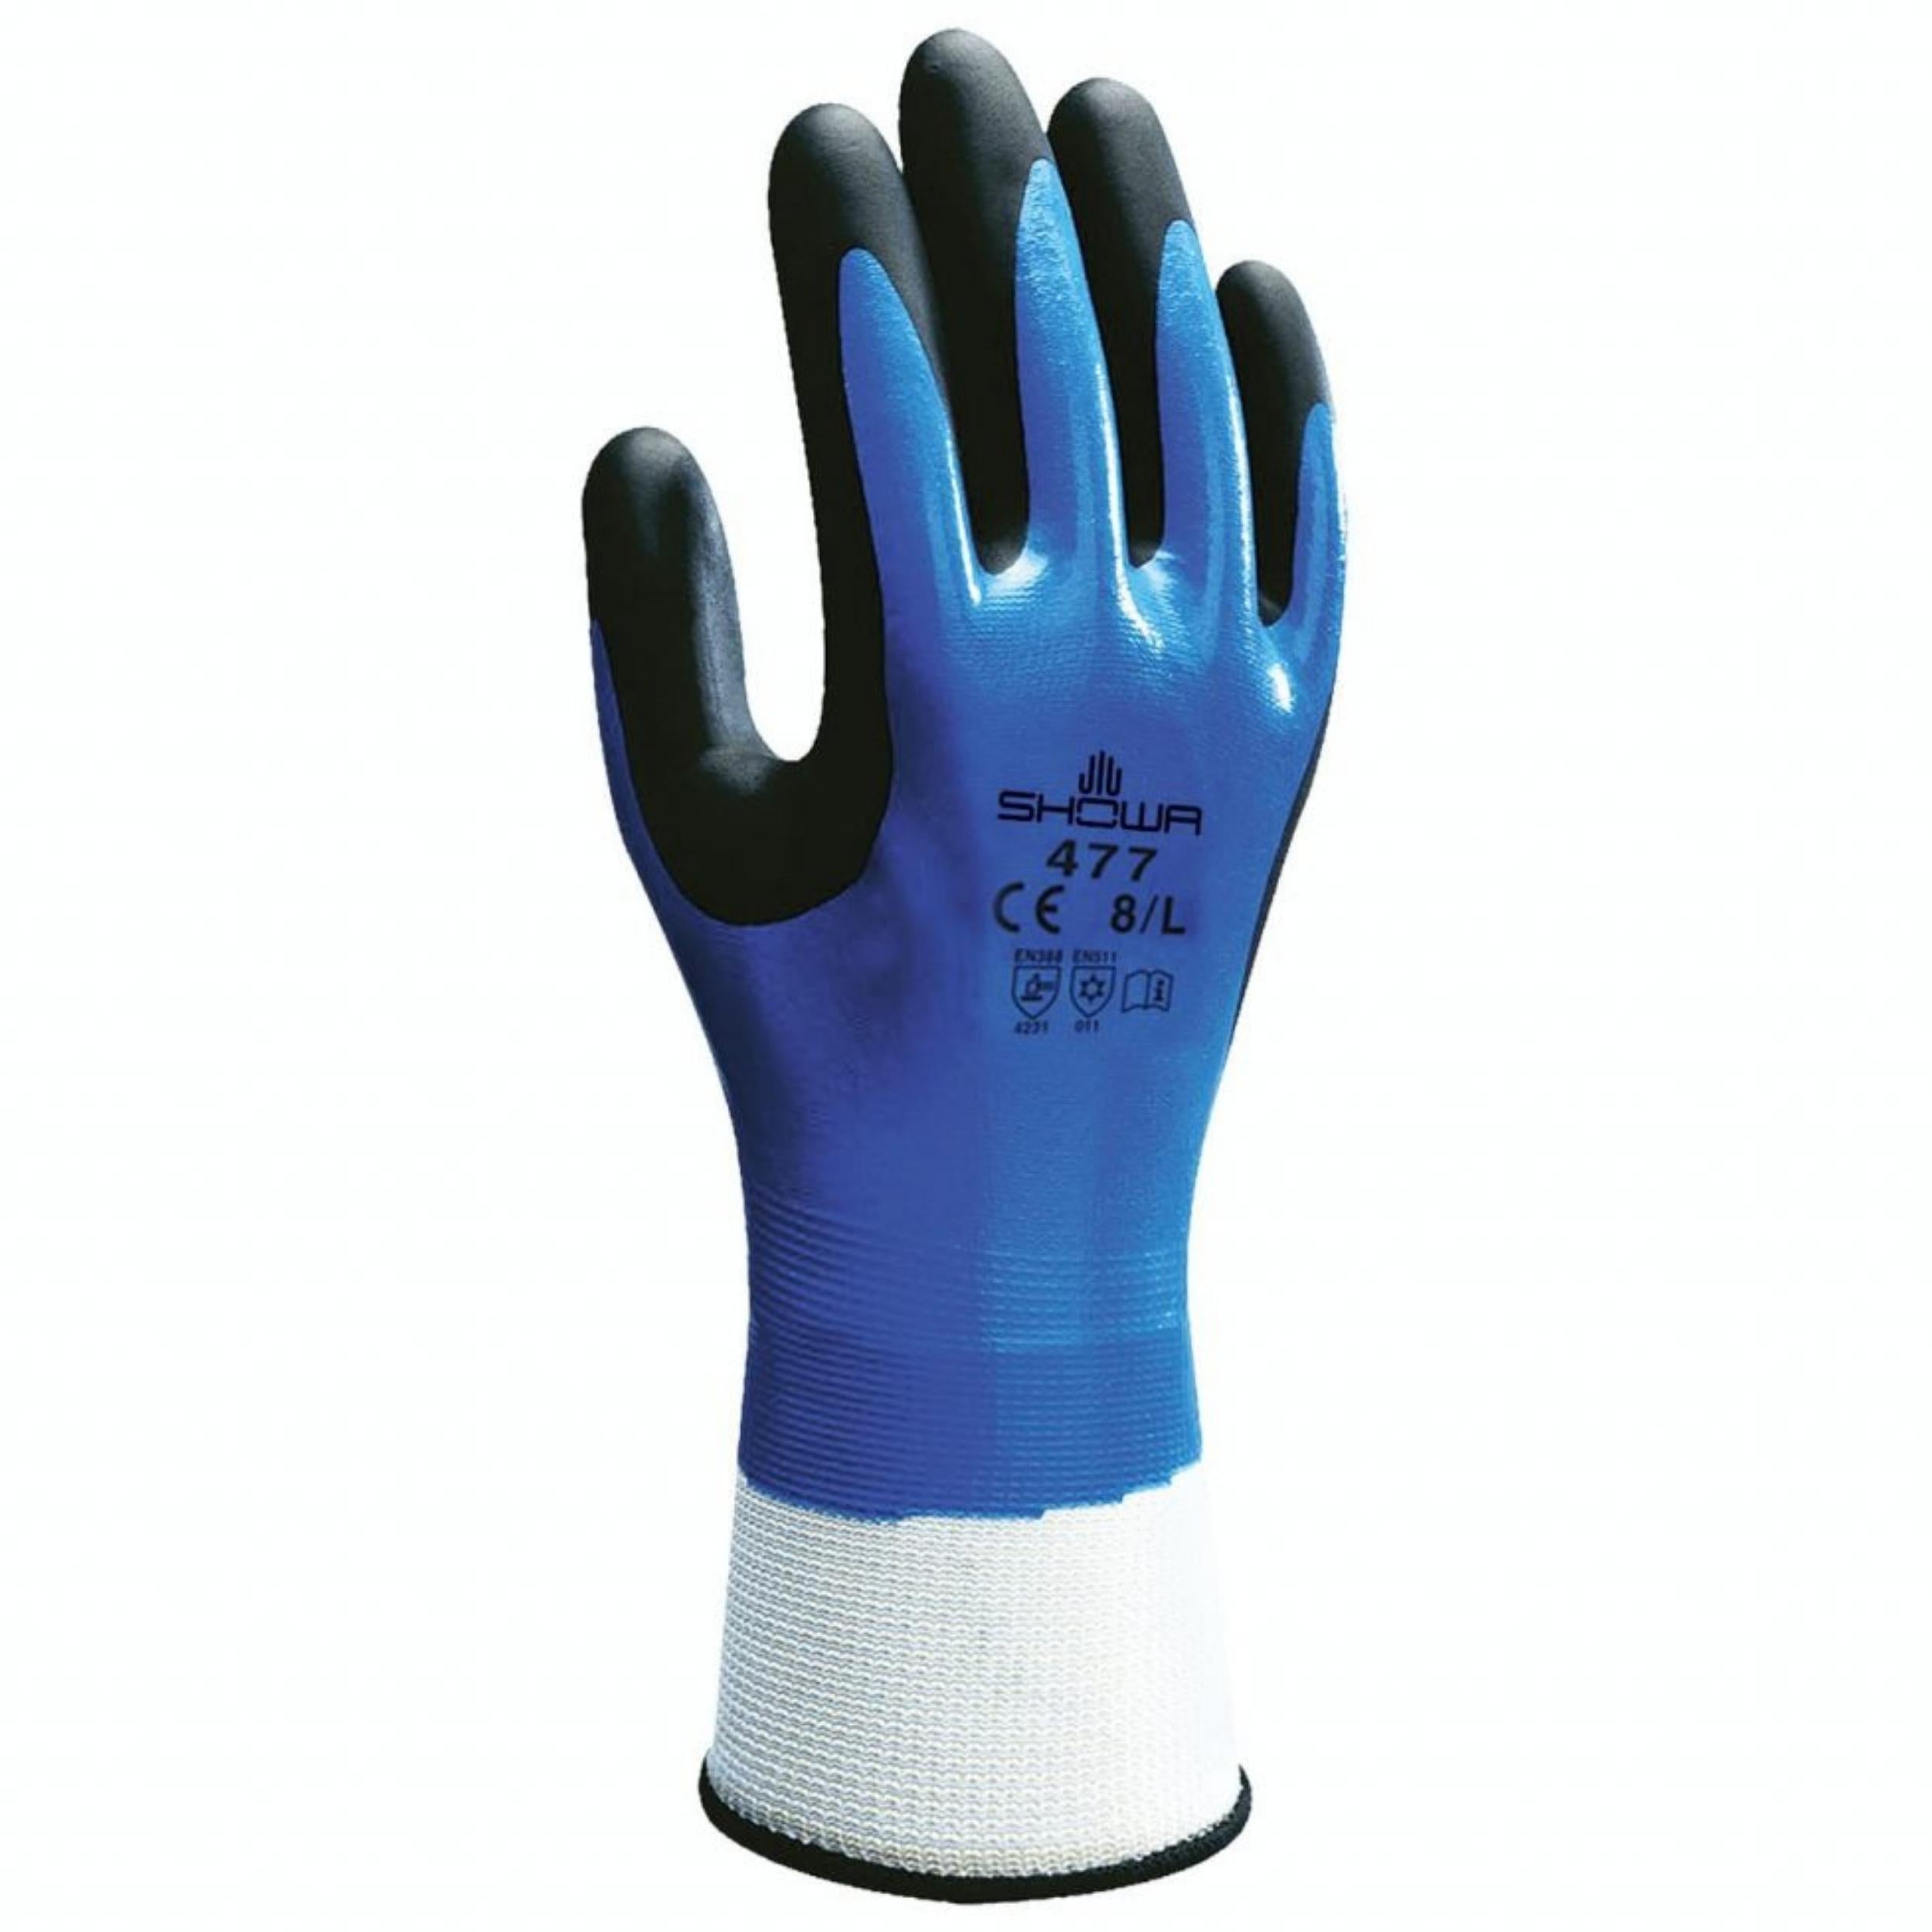 SHOWA 477 Thermal Insulation- Cold Weather Gloves 6 Pack